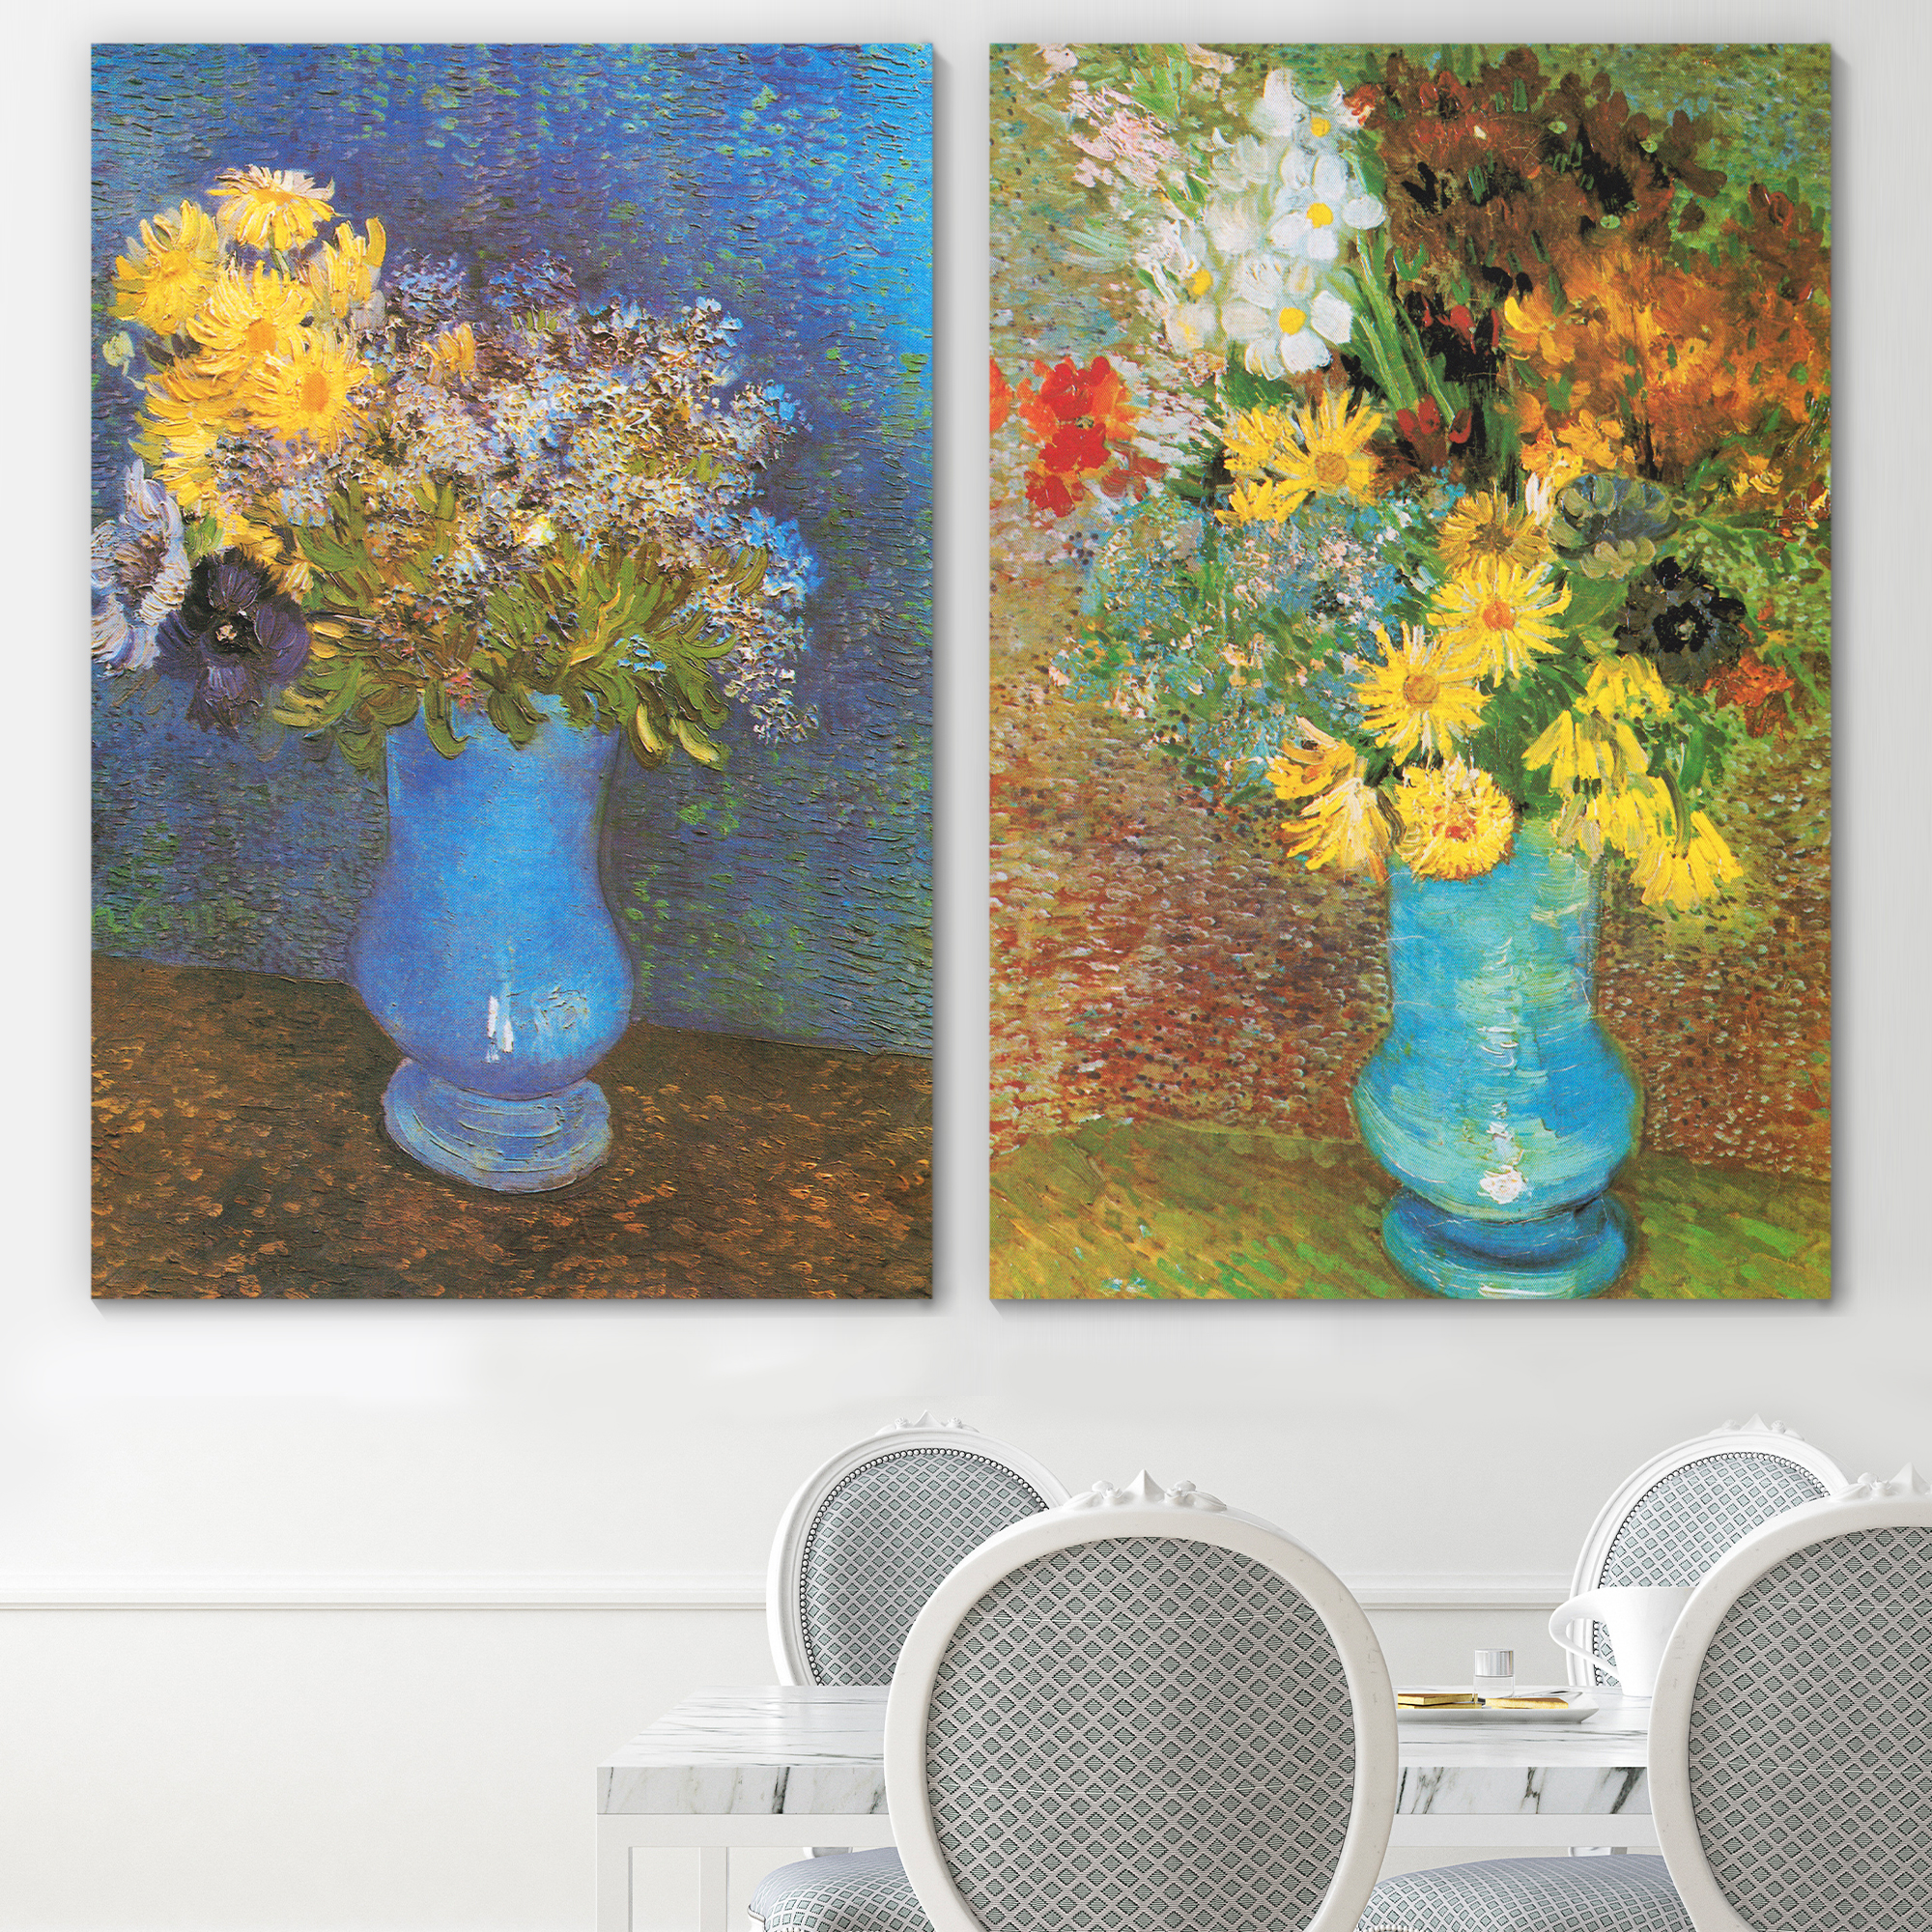 Wall26 - Still life of Flowers in Vase by Vincent Van Gogh - Oil Painting Reproduction in Set of 2 | Canvas Prints Wall Art, Ready to Hang - 16